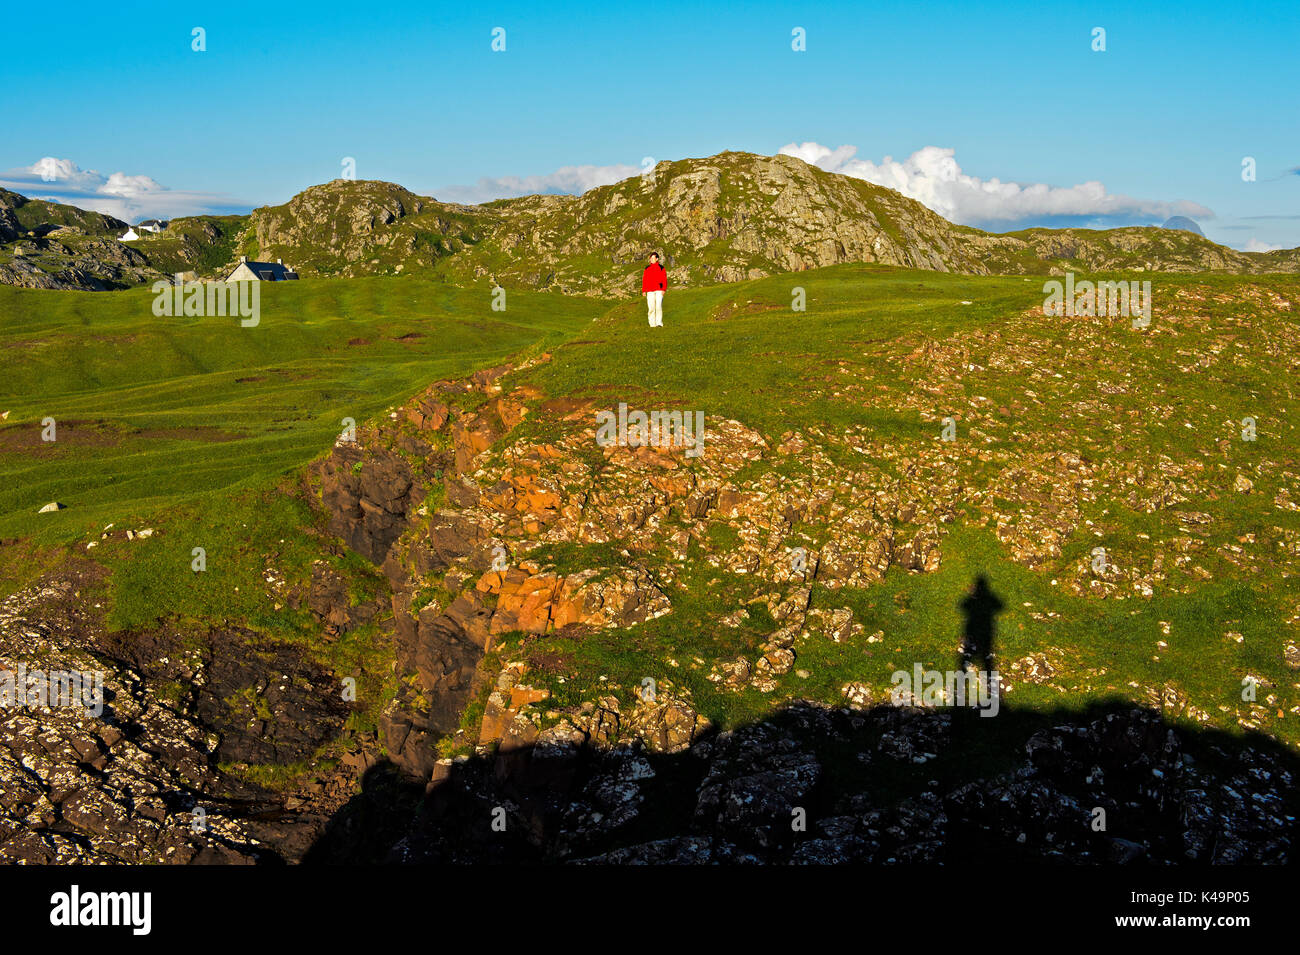 Woman In A Red Jacket Standing On Rocky Meadow, Assynt, Scotland, Great Britain Stock Photo